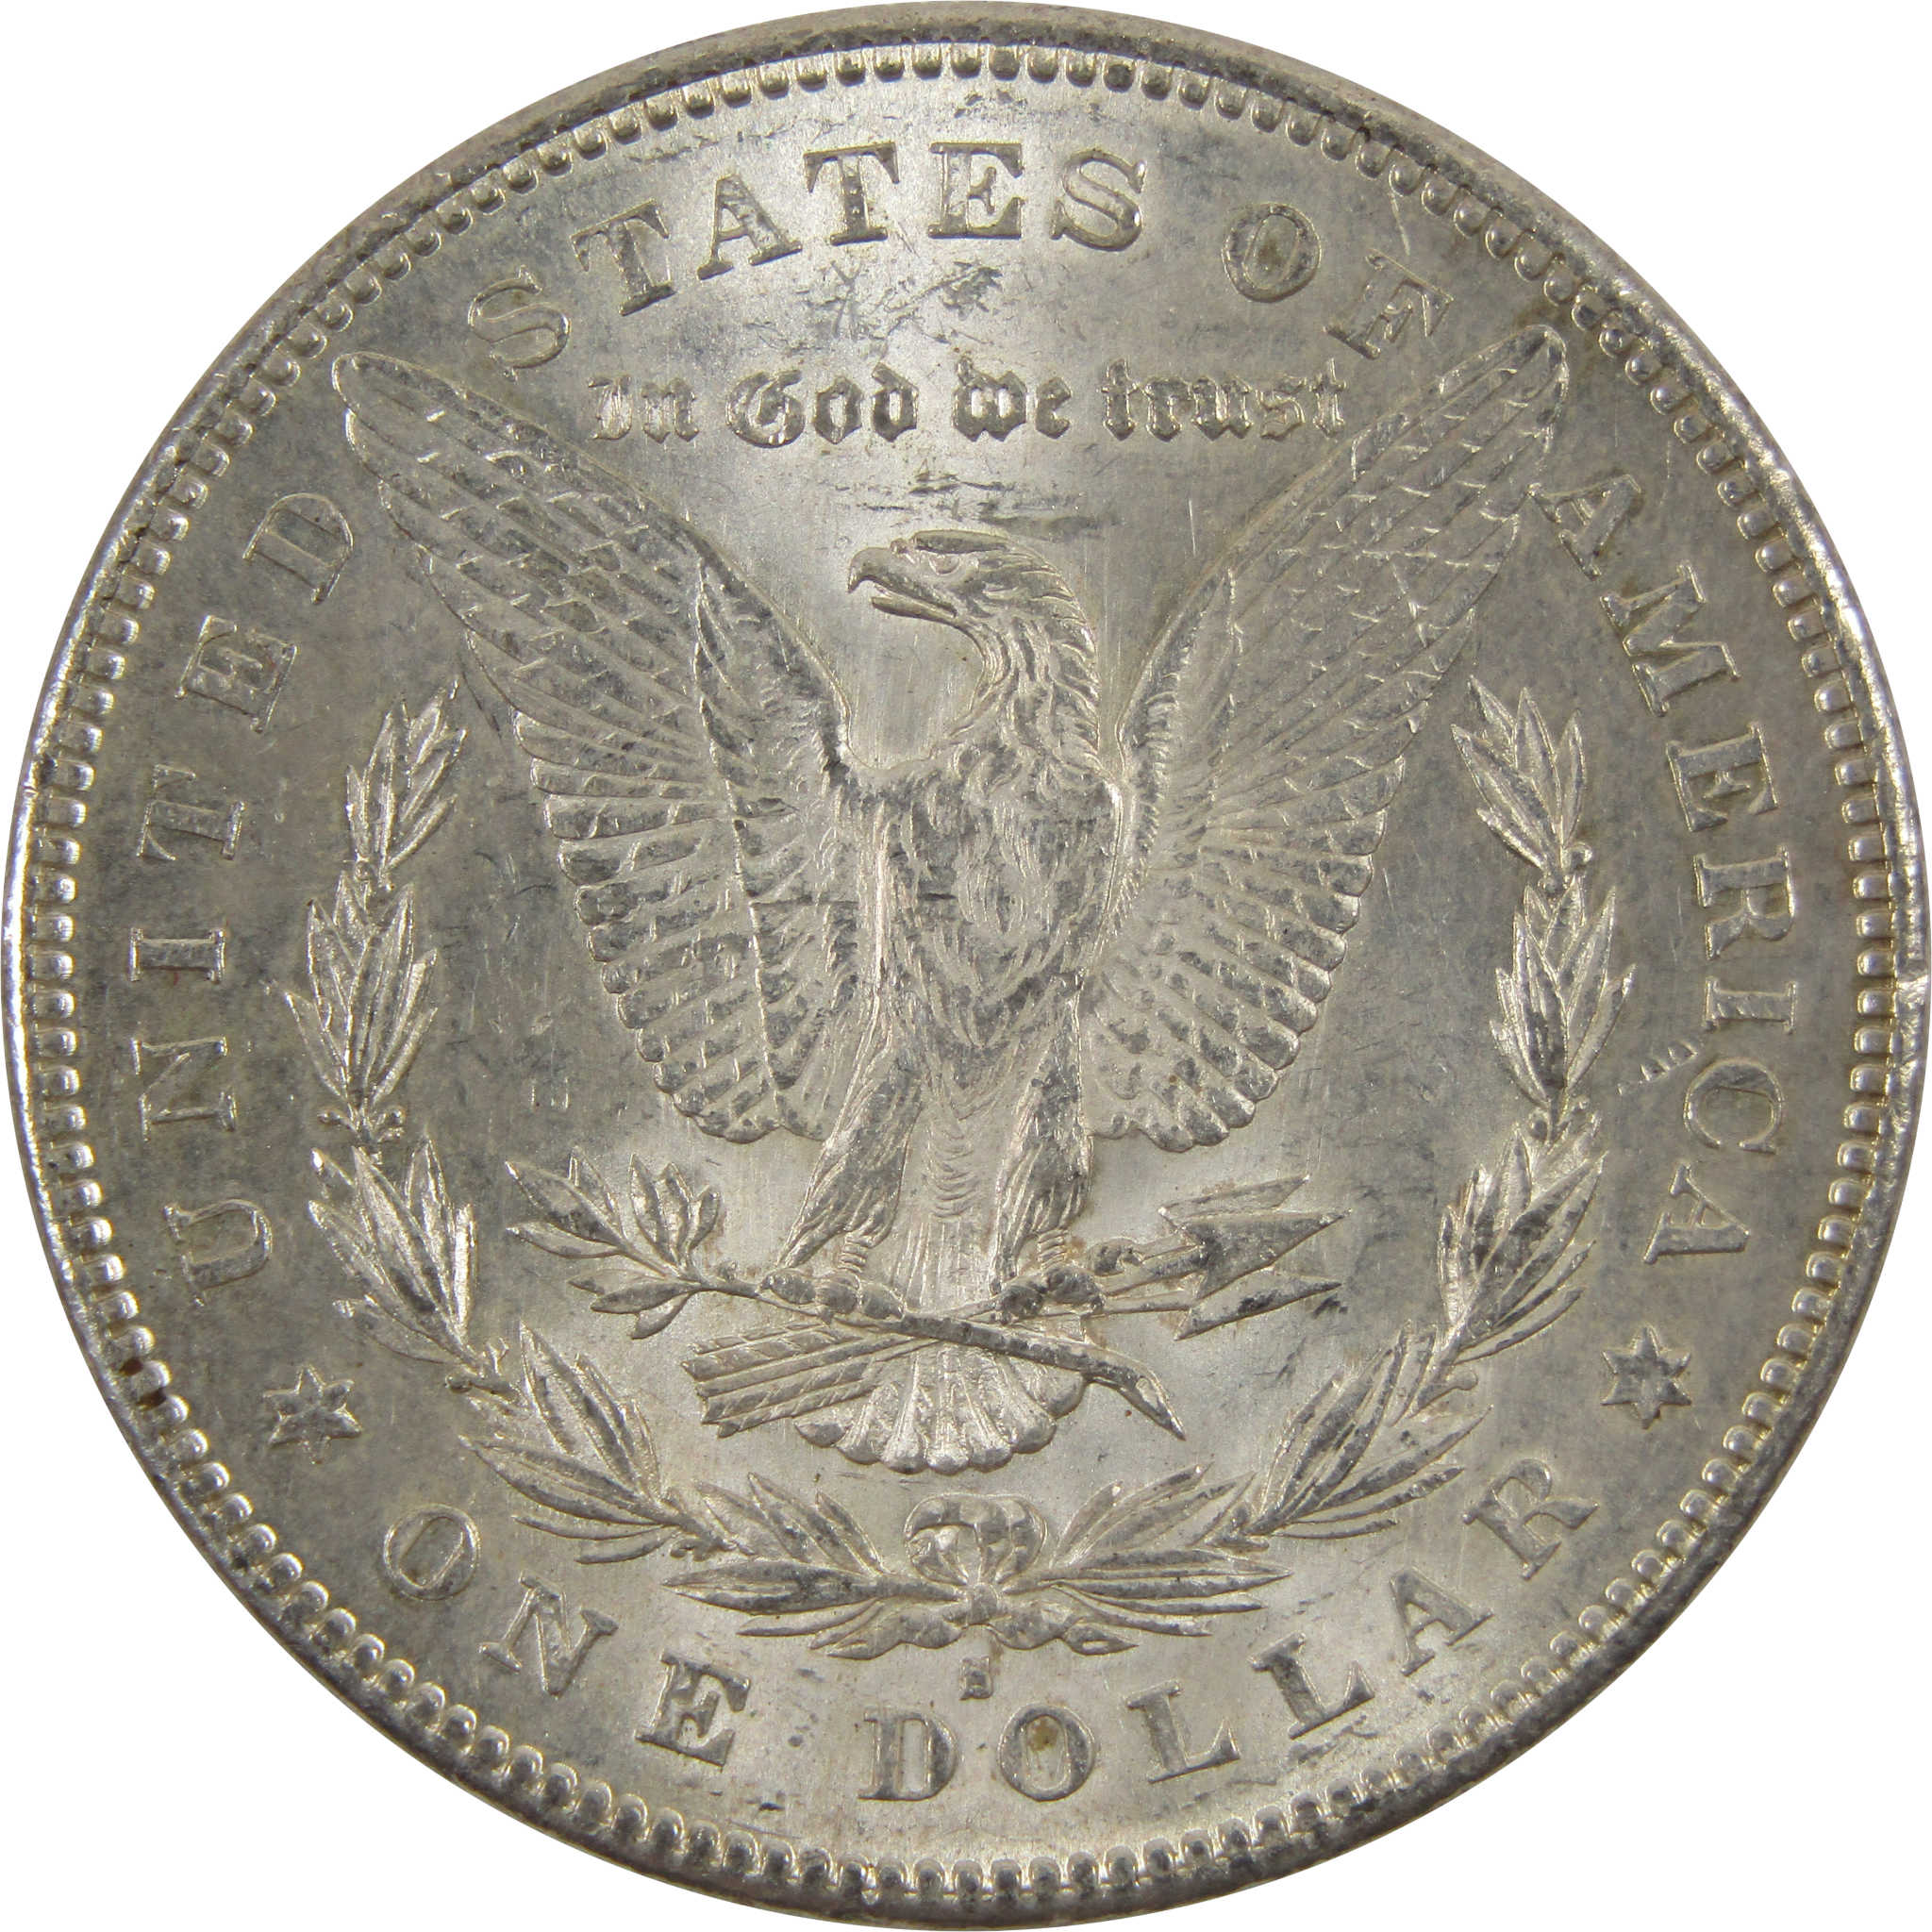 1878 S Morgan Dollar Extremely Fine 90% Silver SKU:I7625 - Morgan coin - Morgan silver dollar - Morgan silver dollar for sale - Profile Coins &amp; Collectibles